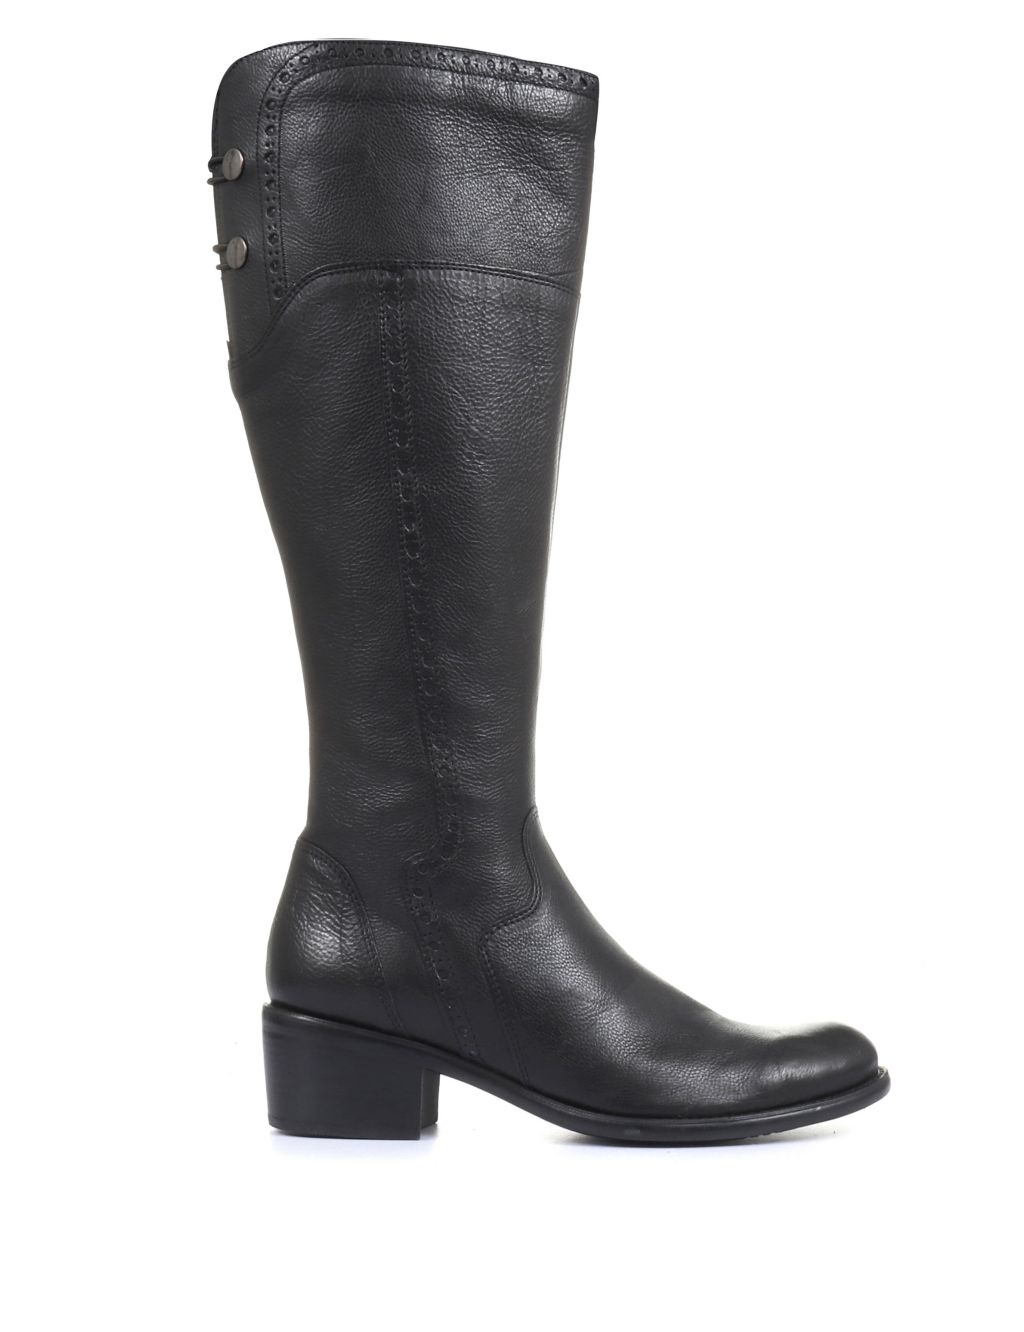 Page 3 - Women's Boots | M&S